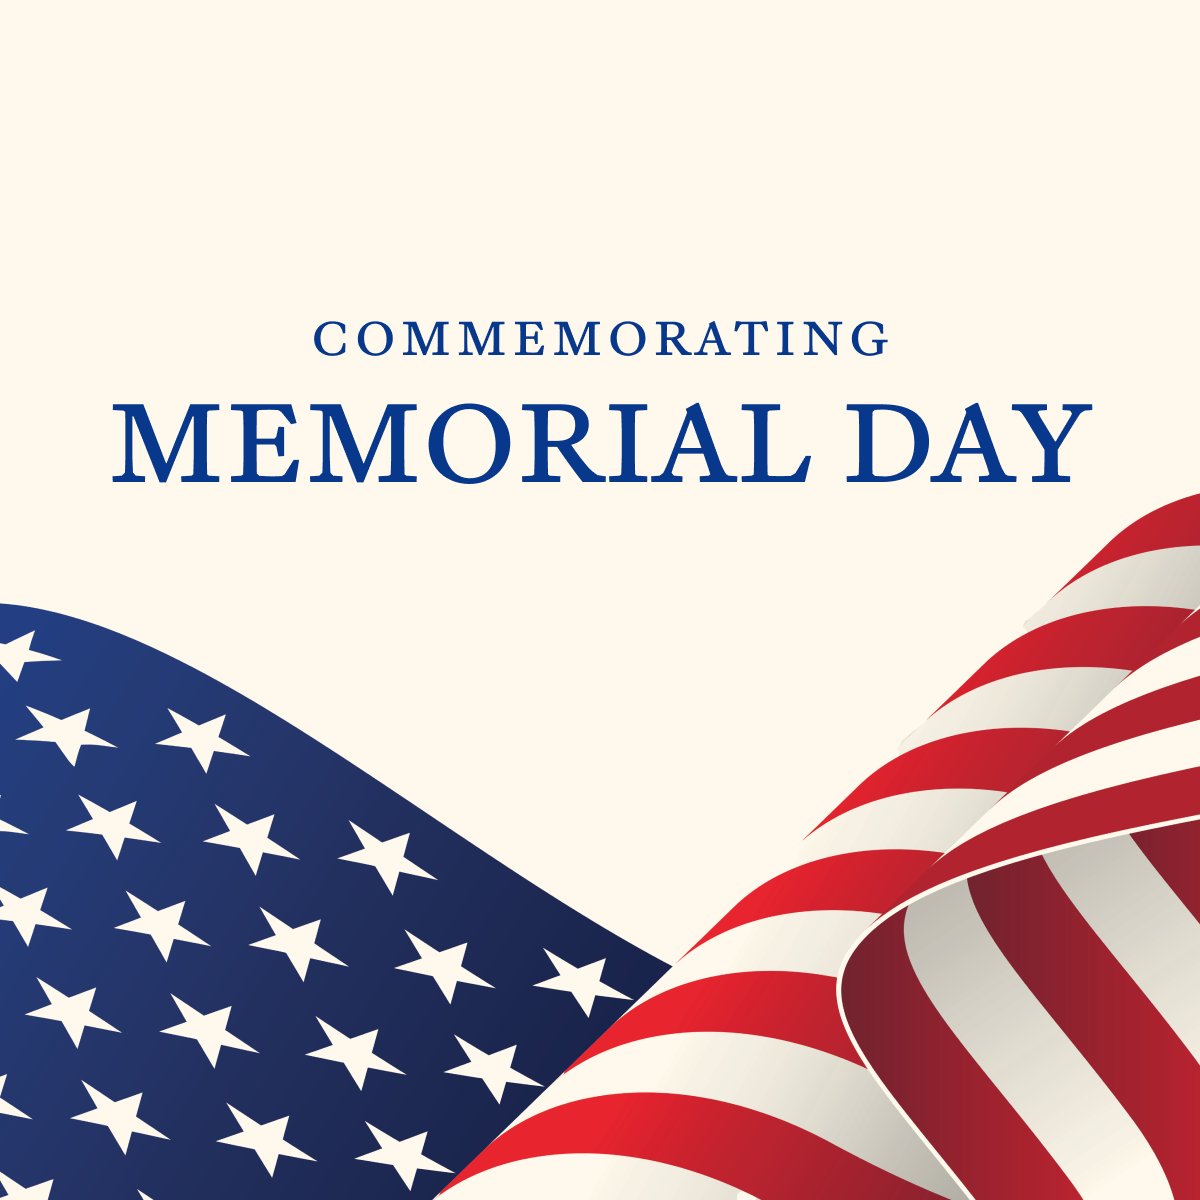 On Memorial Day, we honor our brave service members who sacrificed their lives to defend our freedoms and our country. We owe these heroes—and their loved ones—everything.